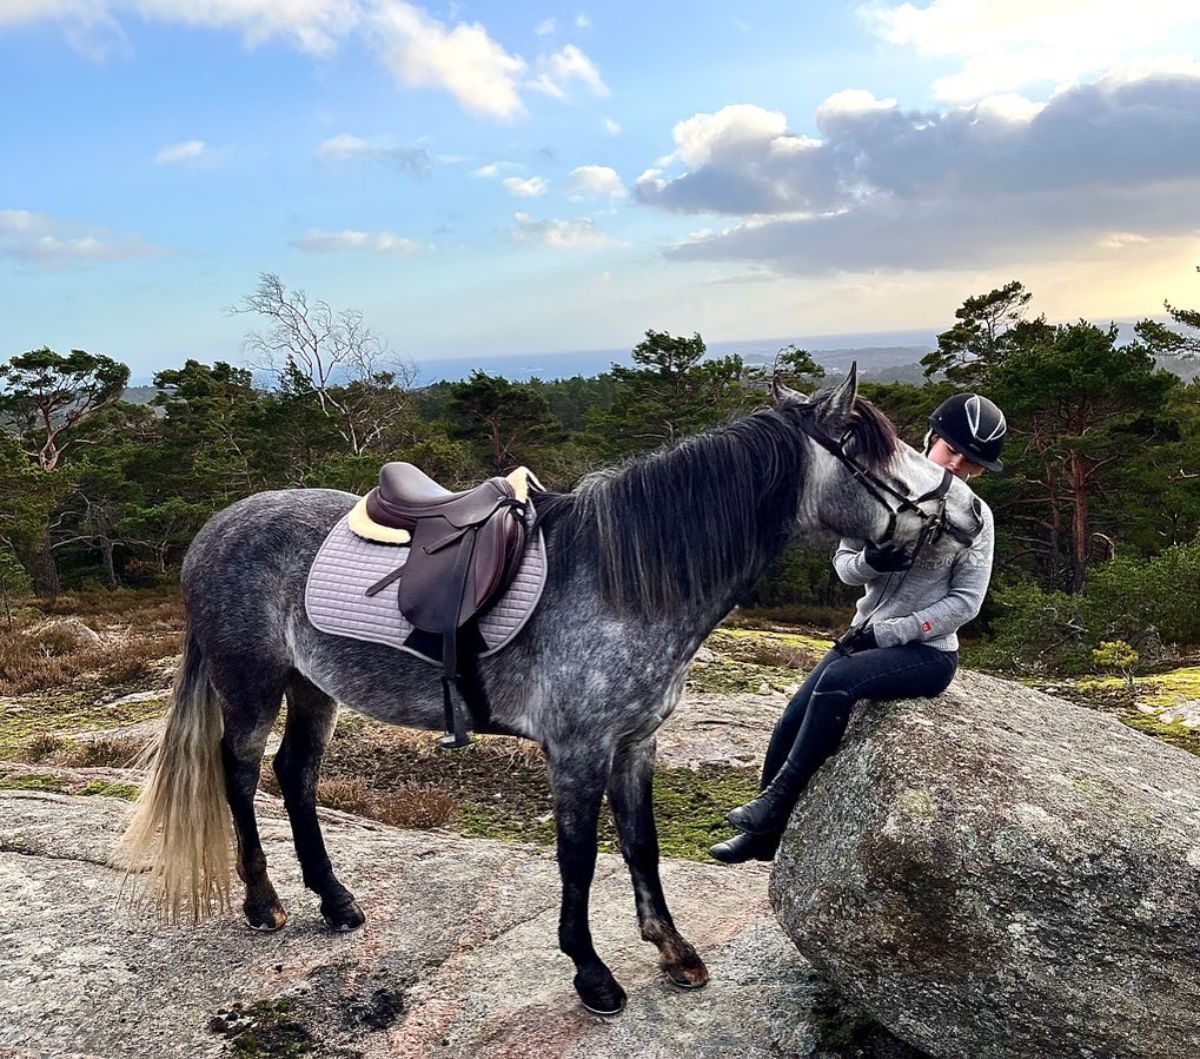 A gray Marismeno horse stands near an equestrian rider sitting on a rock.